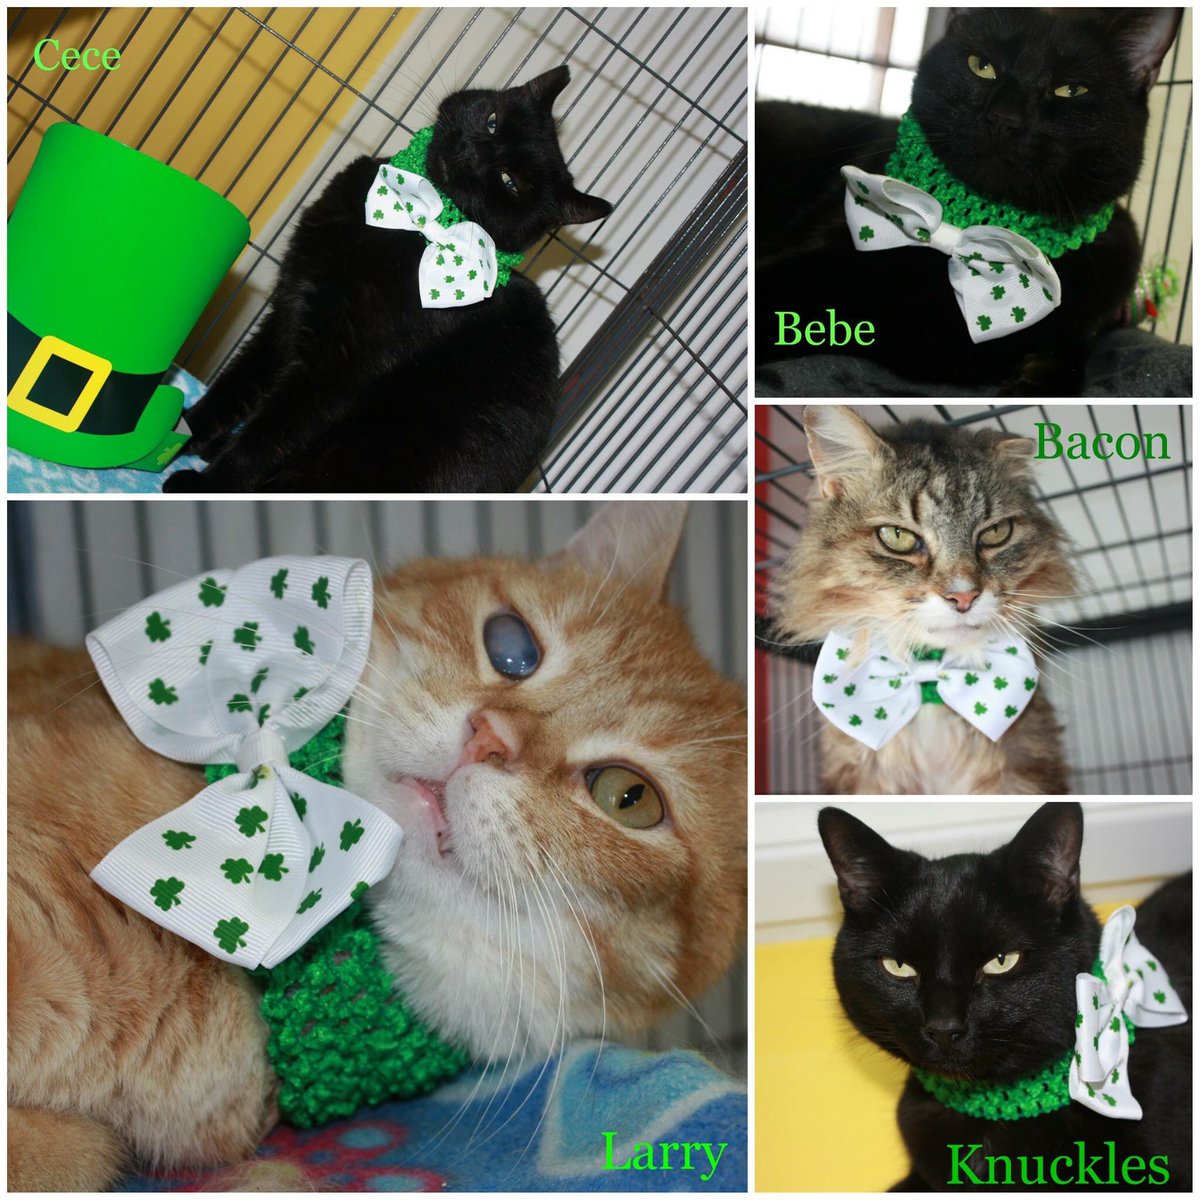 Some of our long term residents are hoping to get lucky today and find their forever homes. Come in today!